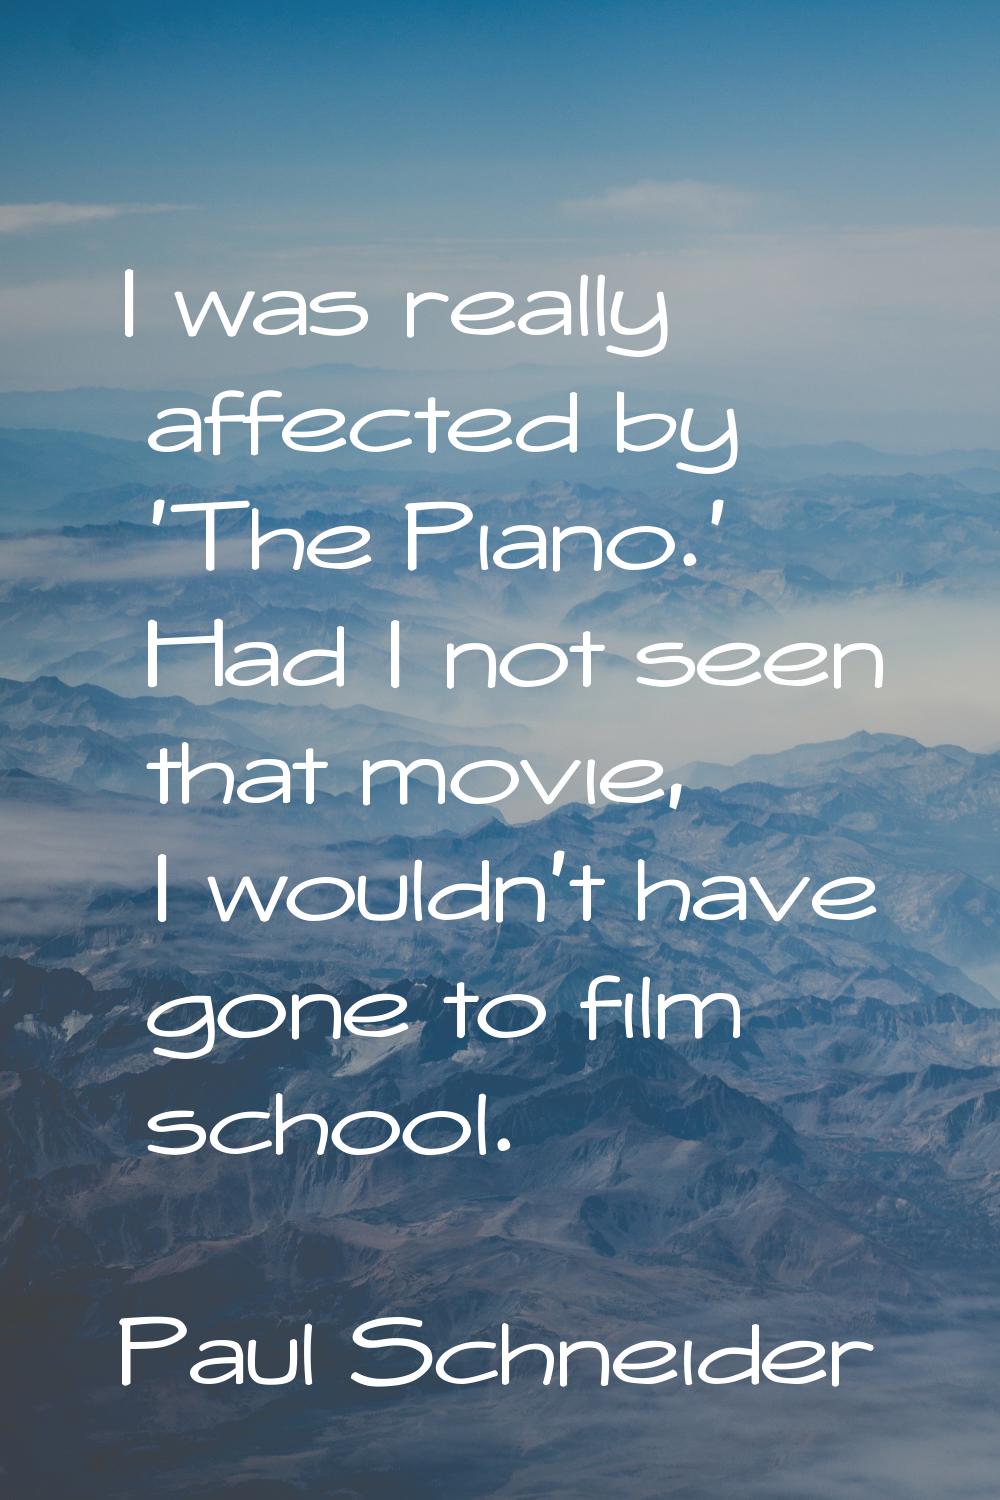 I was really affected by 'The Piano.' Had I not seen that movie, I wouldn't have gone to film schoo